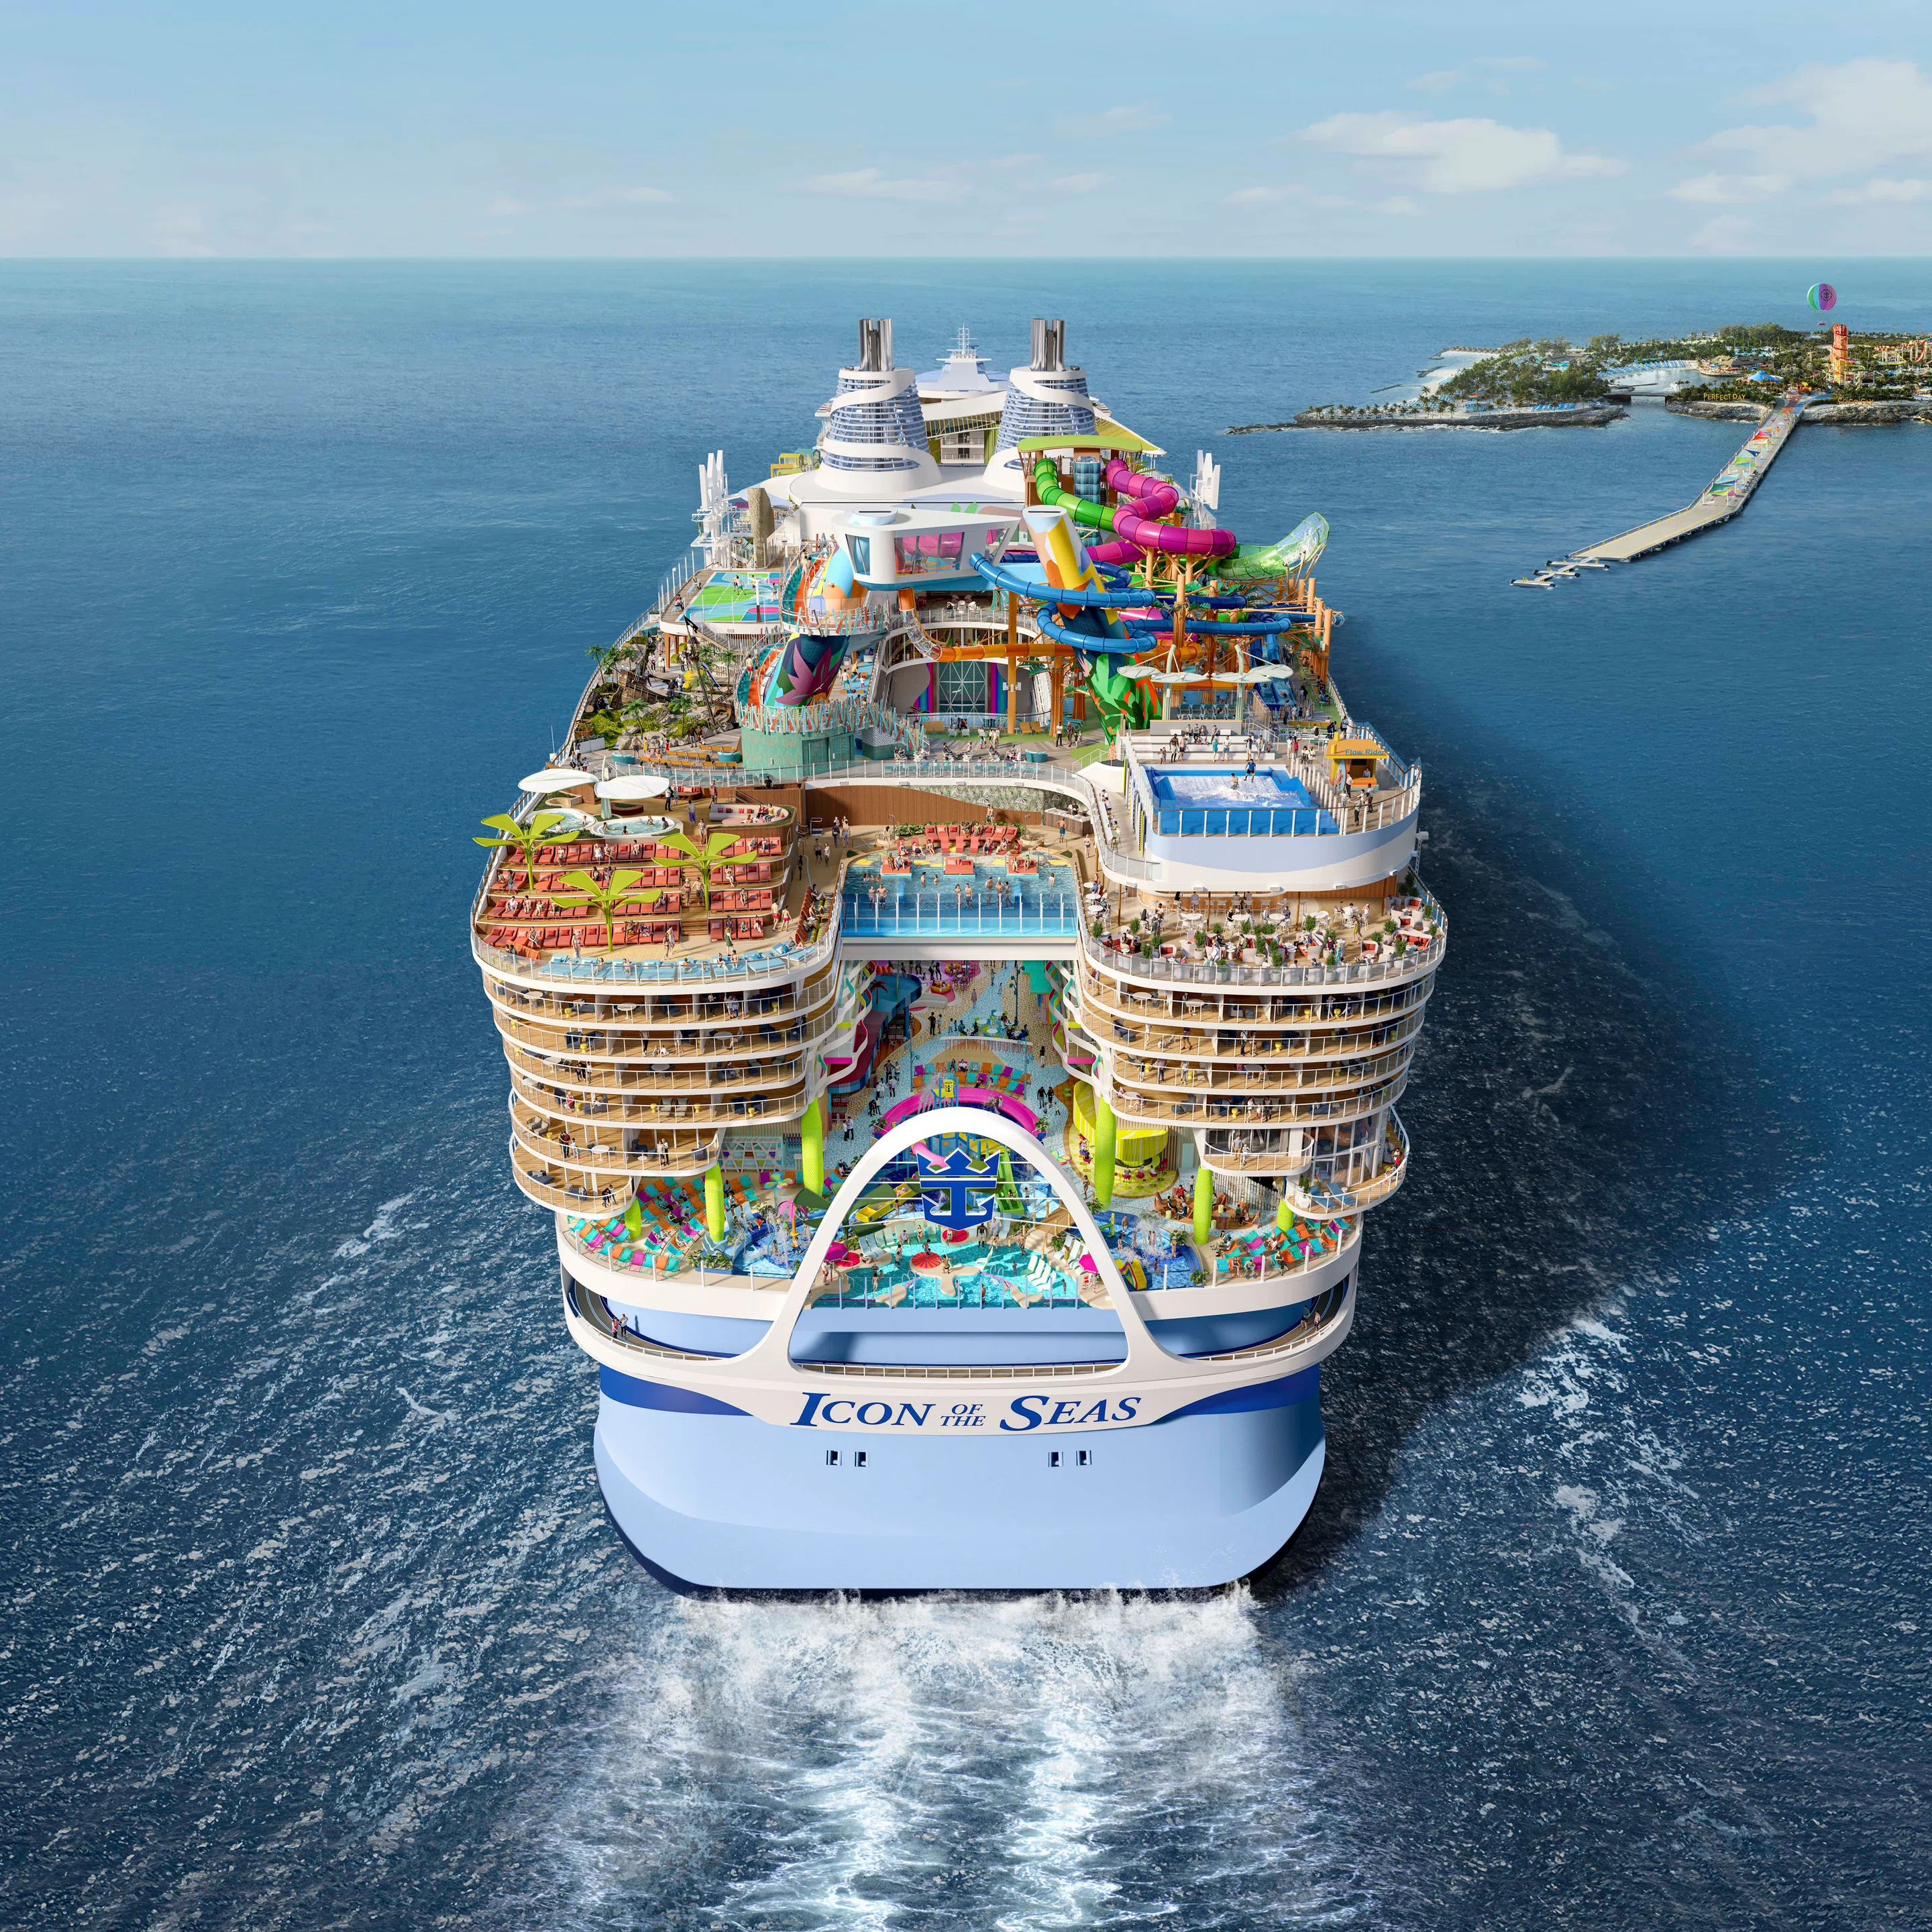 World's largest cruise ship comes complete with a waterpark